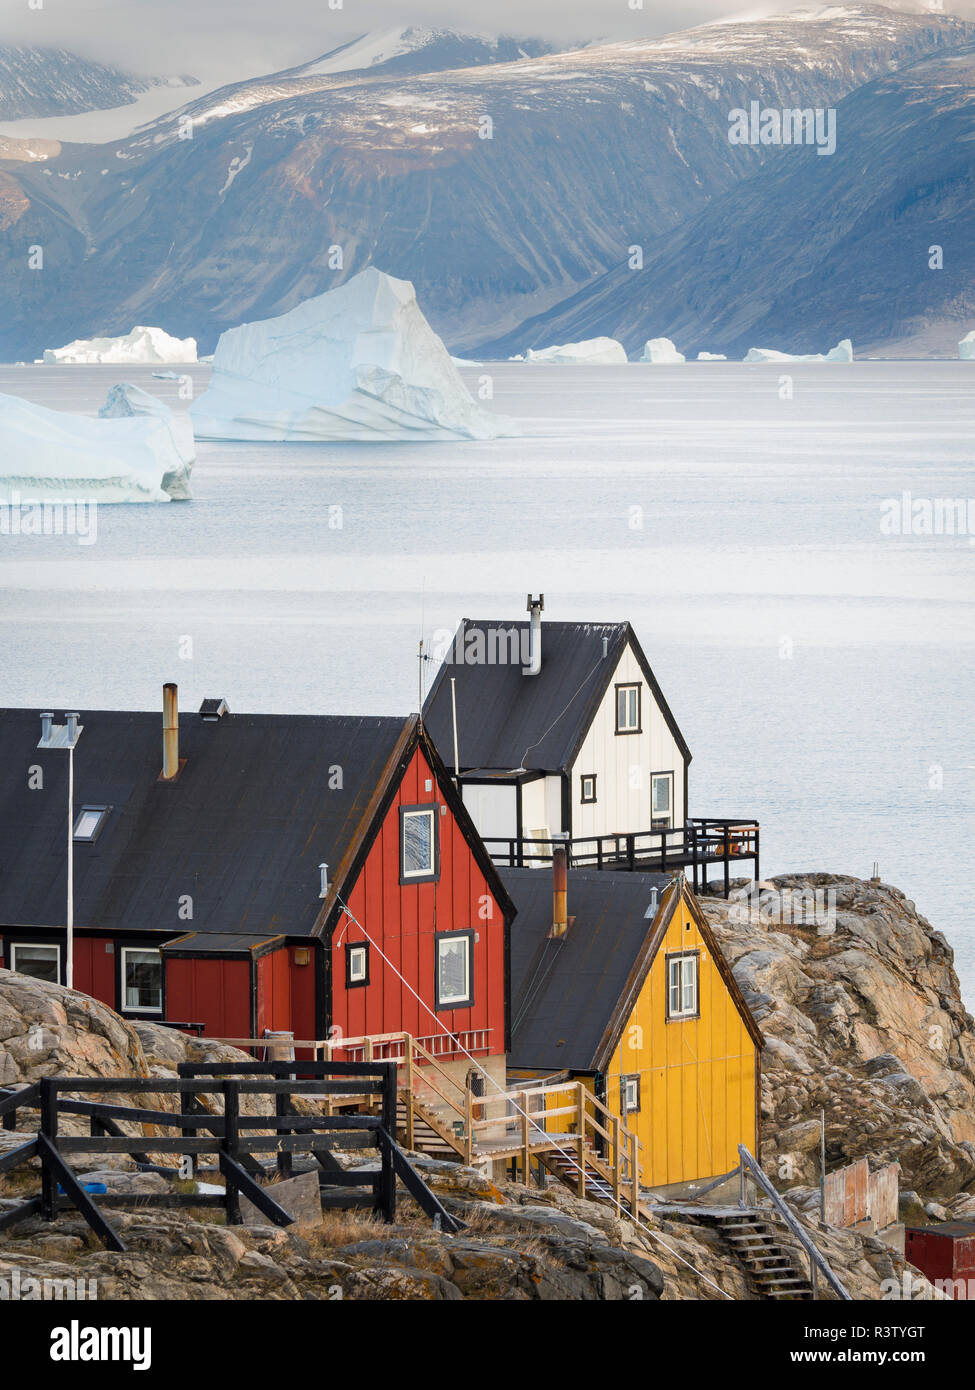 Small town of Uummannaq and glaciated Nuussuaq Peninsula in the background. Greenland, Denmark (Editorial Use Only) Stock Photo